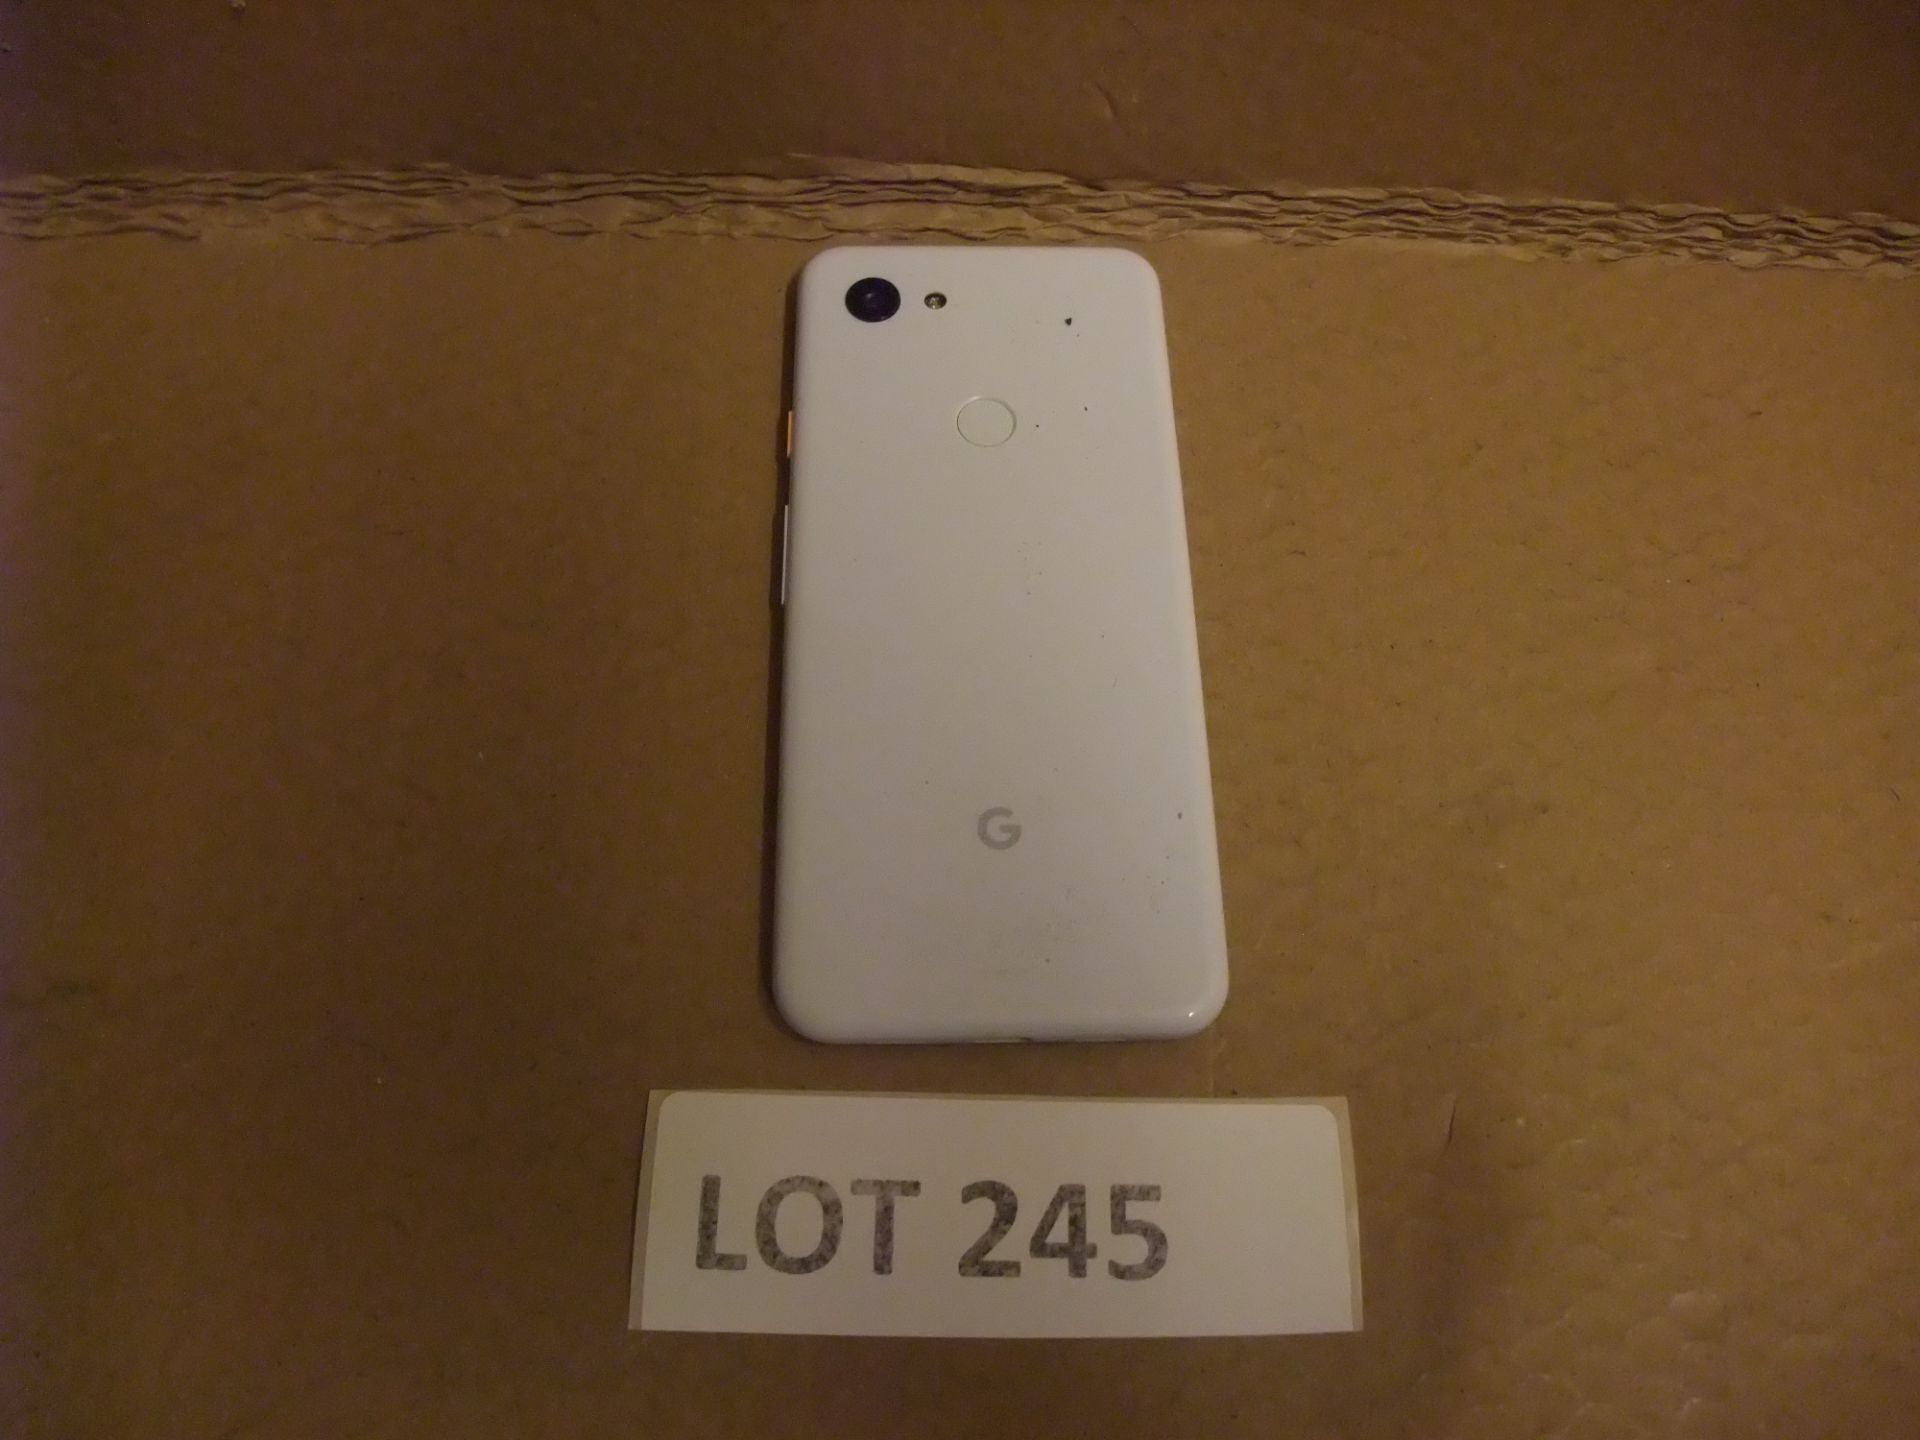 Google Pixel 3a (black) Android Phone - 64GbPlease read the following important notes:- All lots - Image 2 of 4